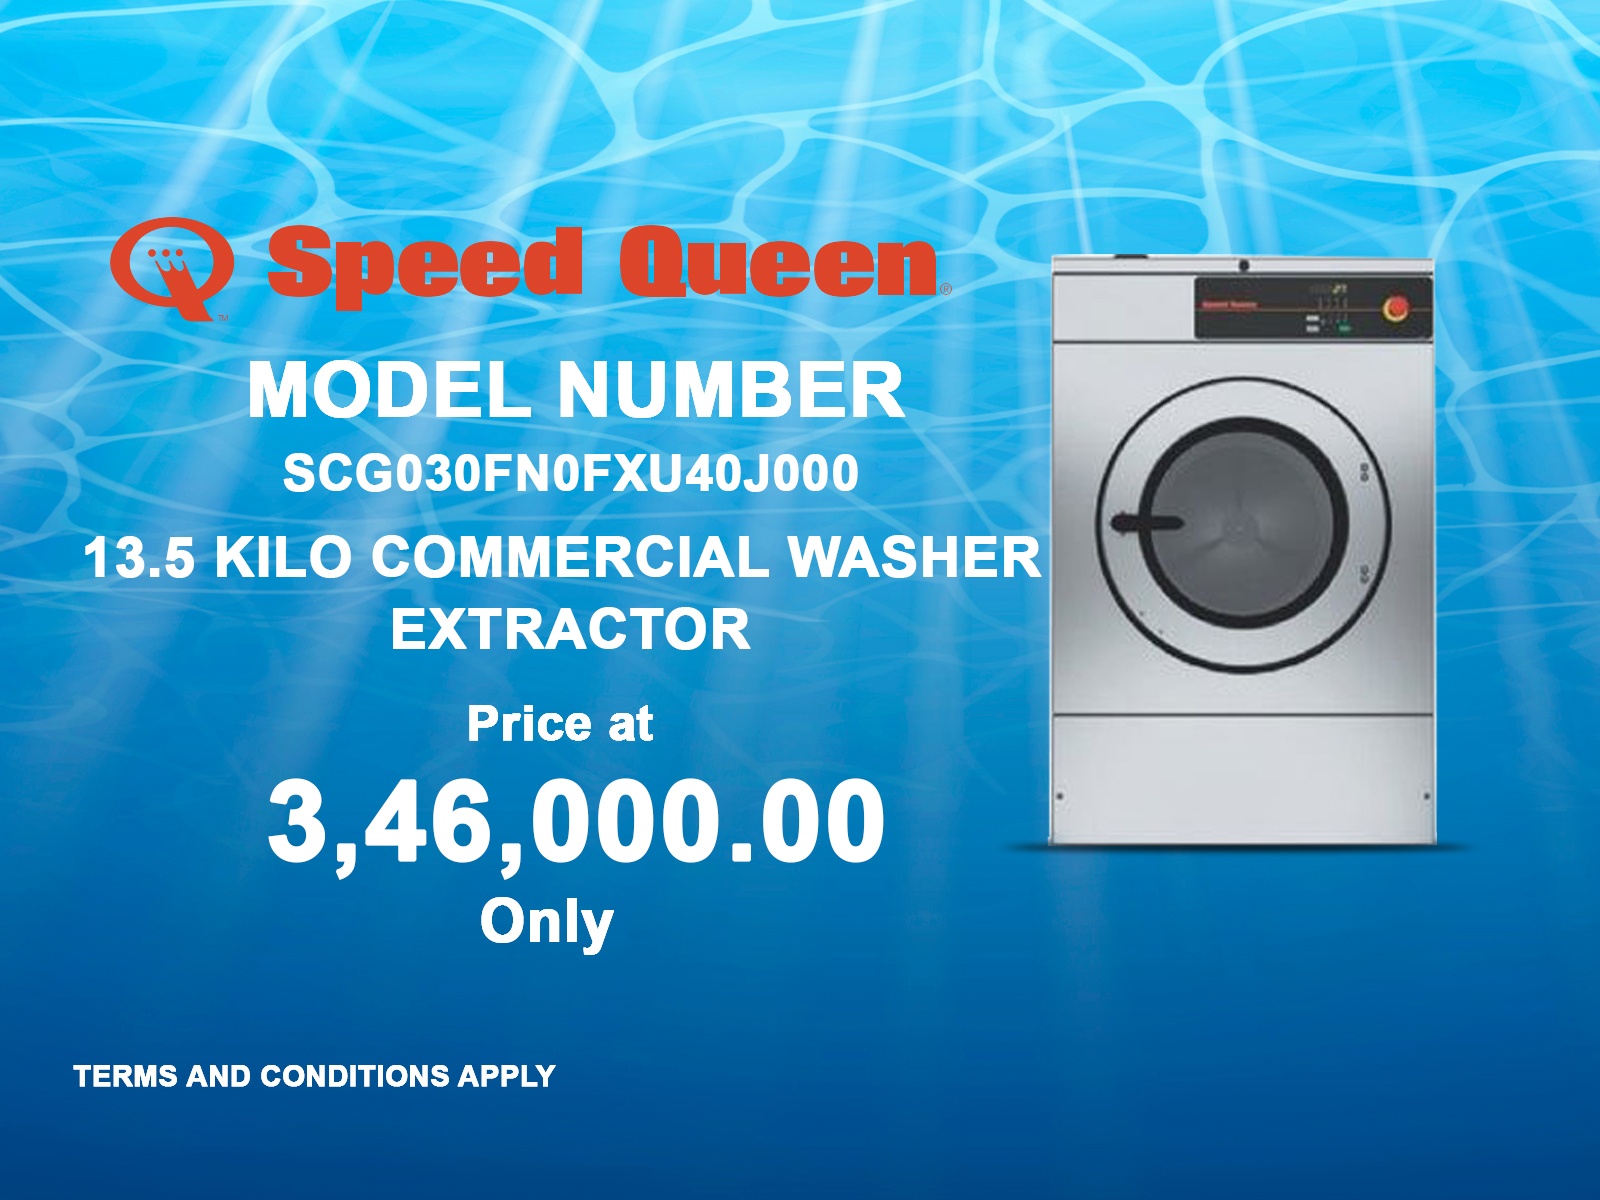 13.5 Kilo Commercial Washer Extractor